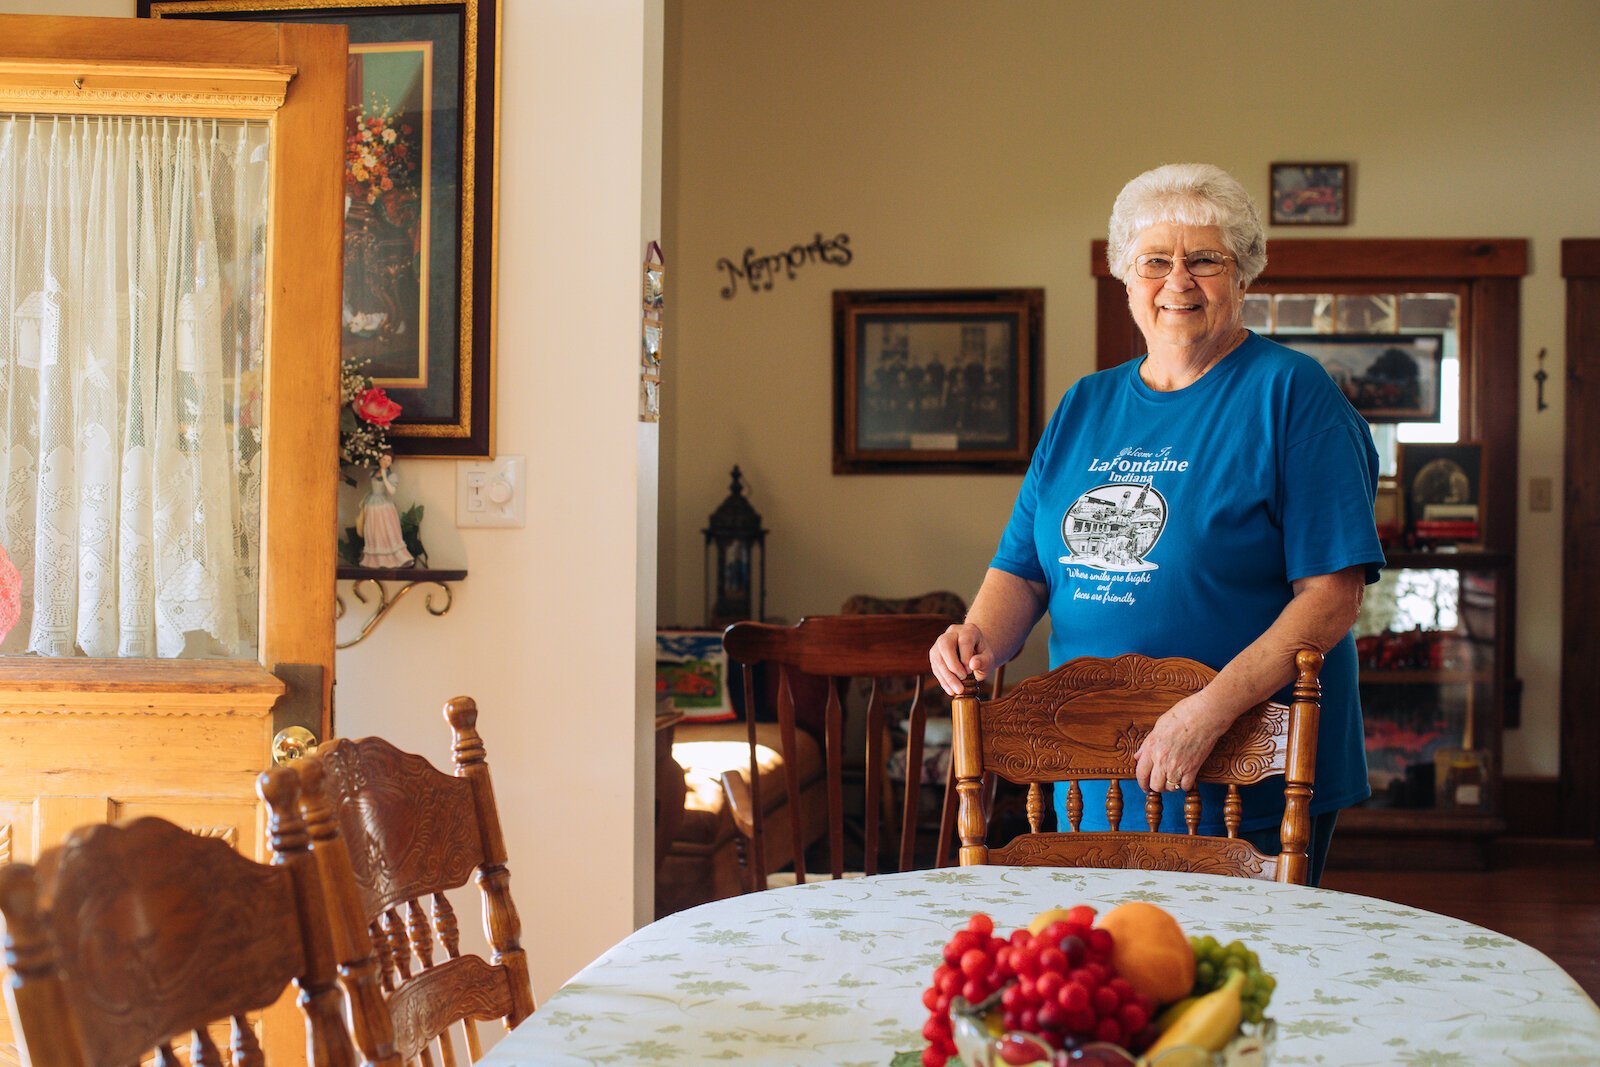 Janet Pattee in her home, which was renovated after a fire in 2007.